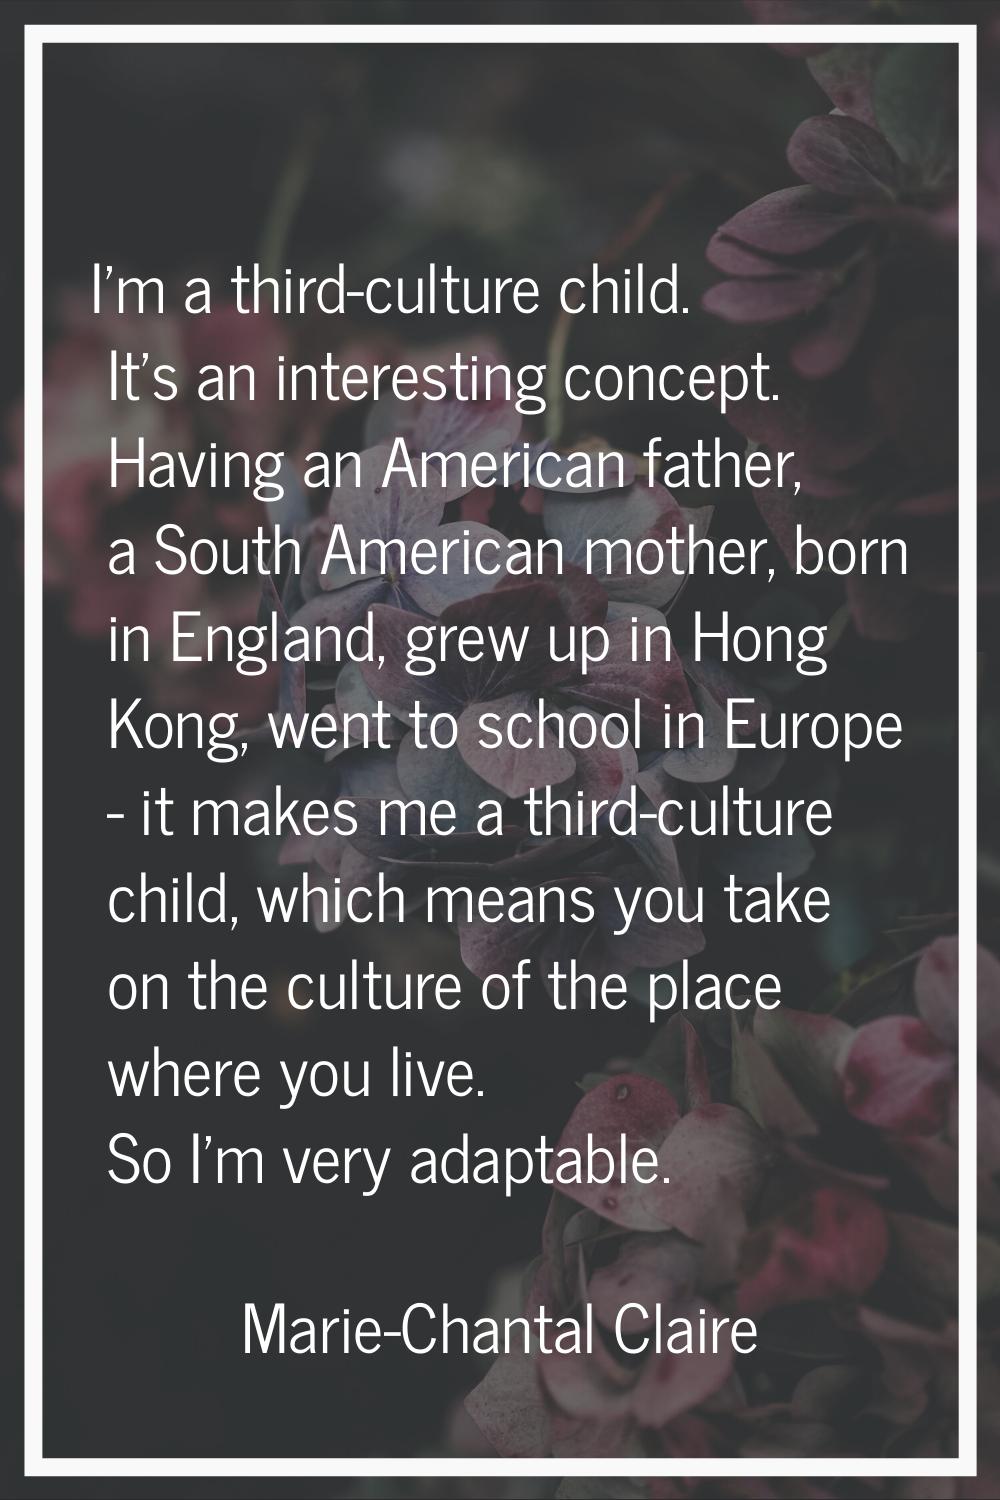 I'm a third-culture child. It's an interesting concept. Having an American father, a South American